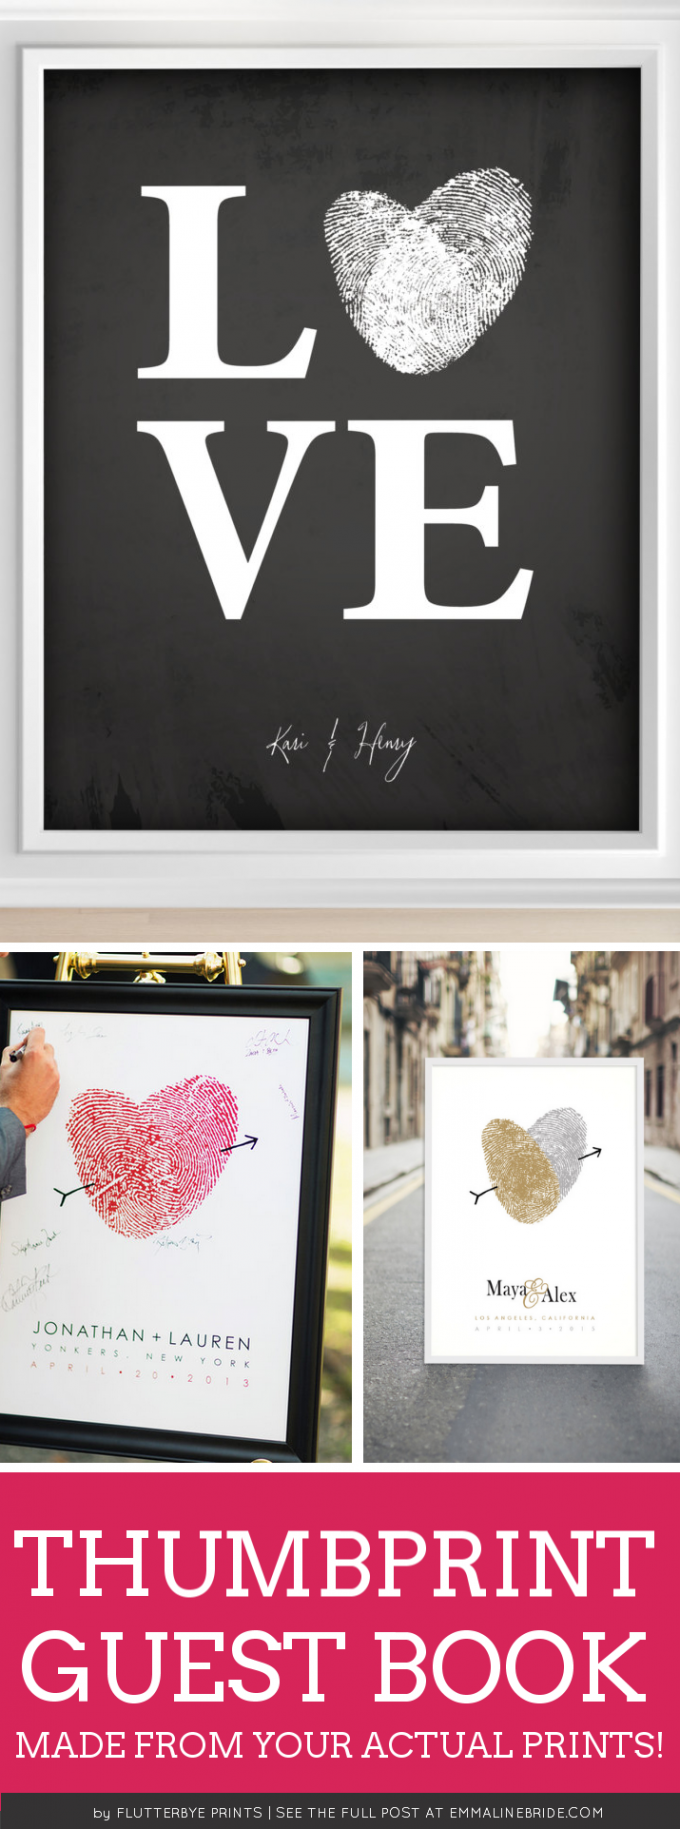 Thumbprint guest book made from your actual thumbprints! What a cool wedding idea! By Flutterbye Prints. Via Emmaline Bride. https://emmalinebride.com/wedding/thumbprint-guest-book